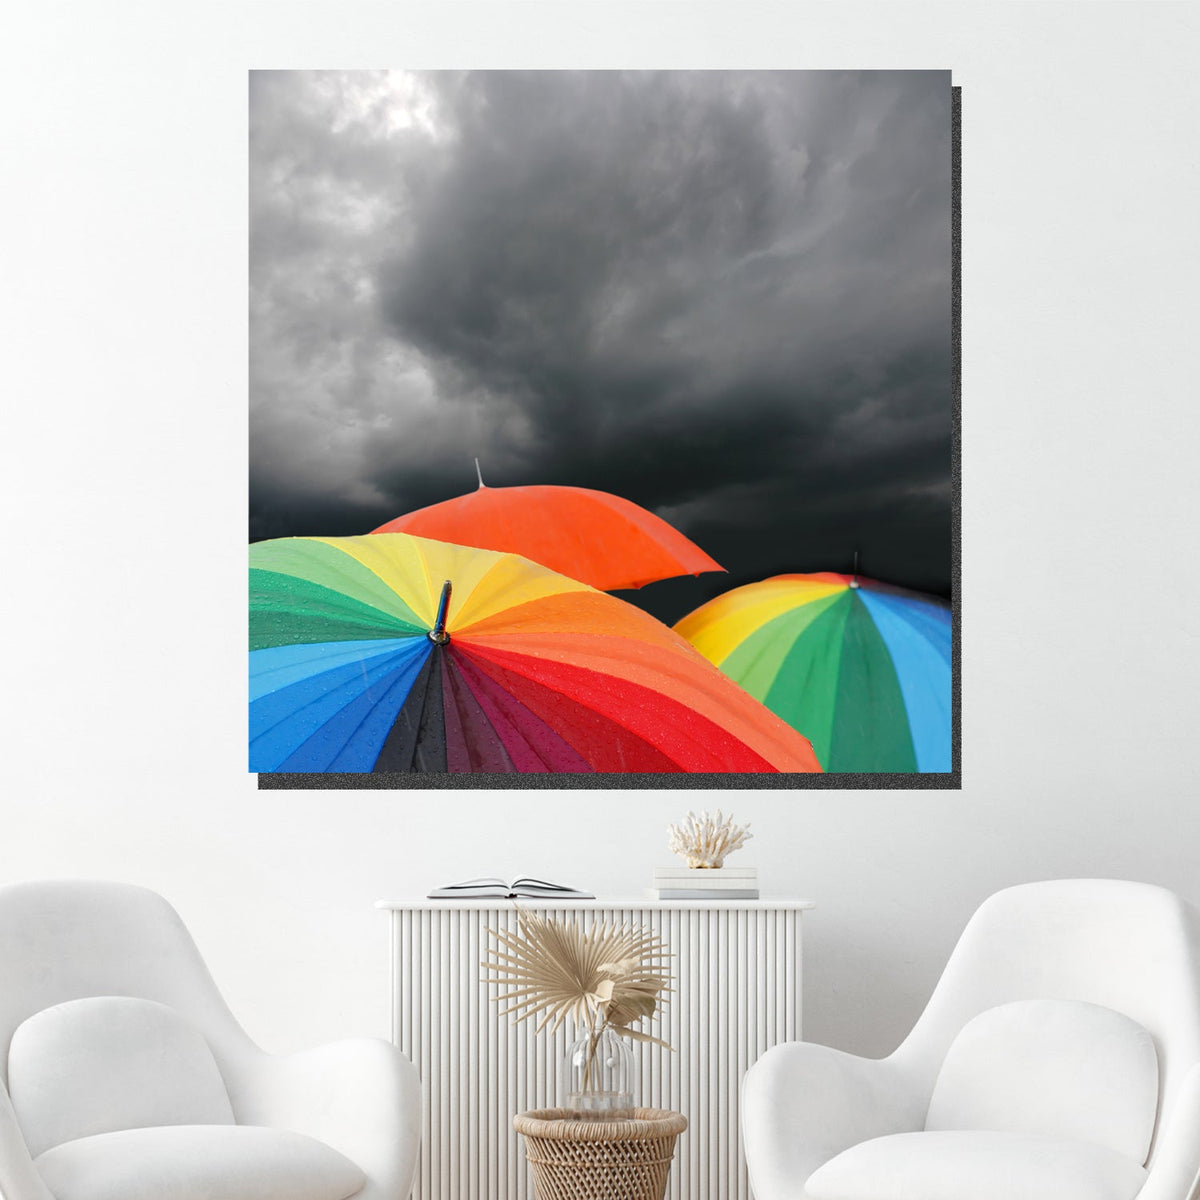 https://cdn.shopify.com/s/files/1/0387/9986/8044/products/RainbowShowerCanvasArtprintStretched-3.jpg